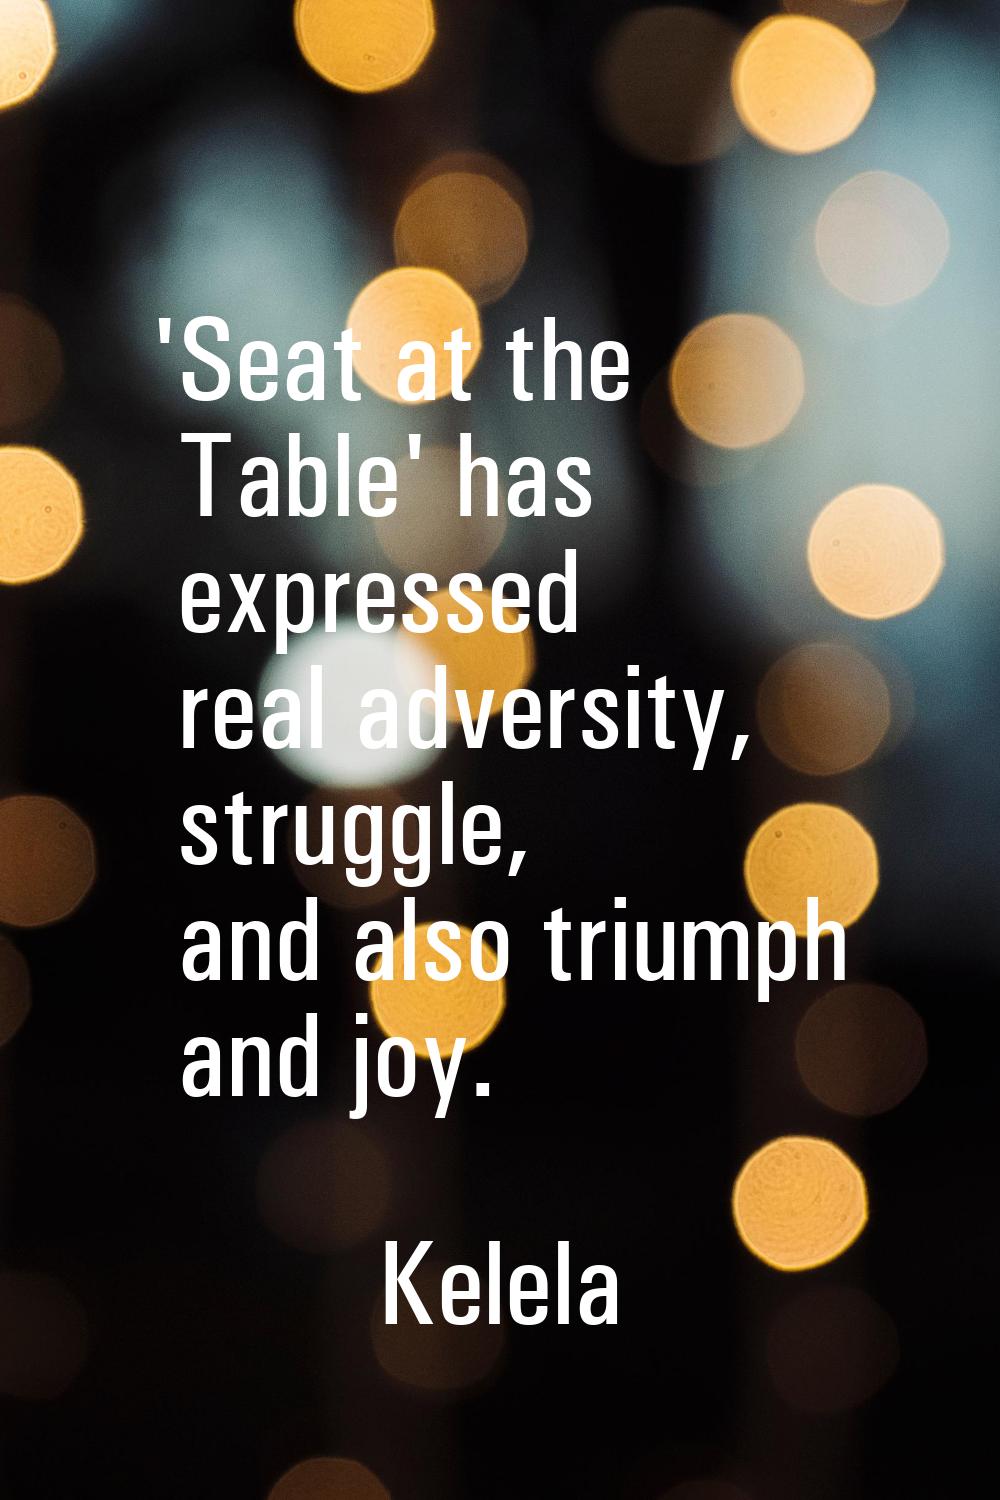 'Seat at the Table' has expressed real adversity, struggle, and also triumph and joy.